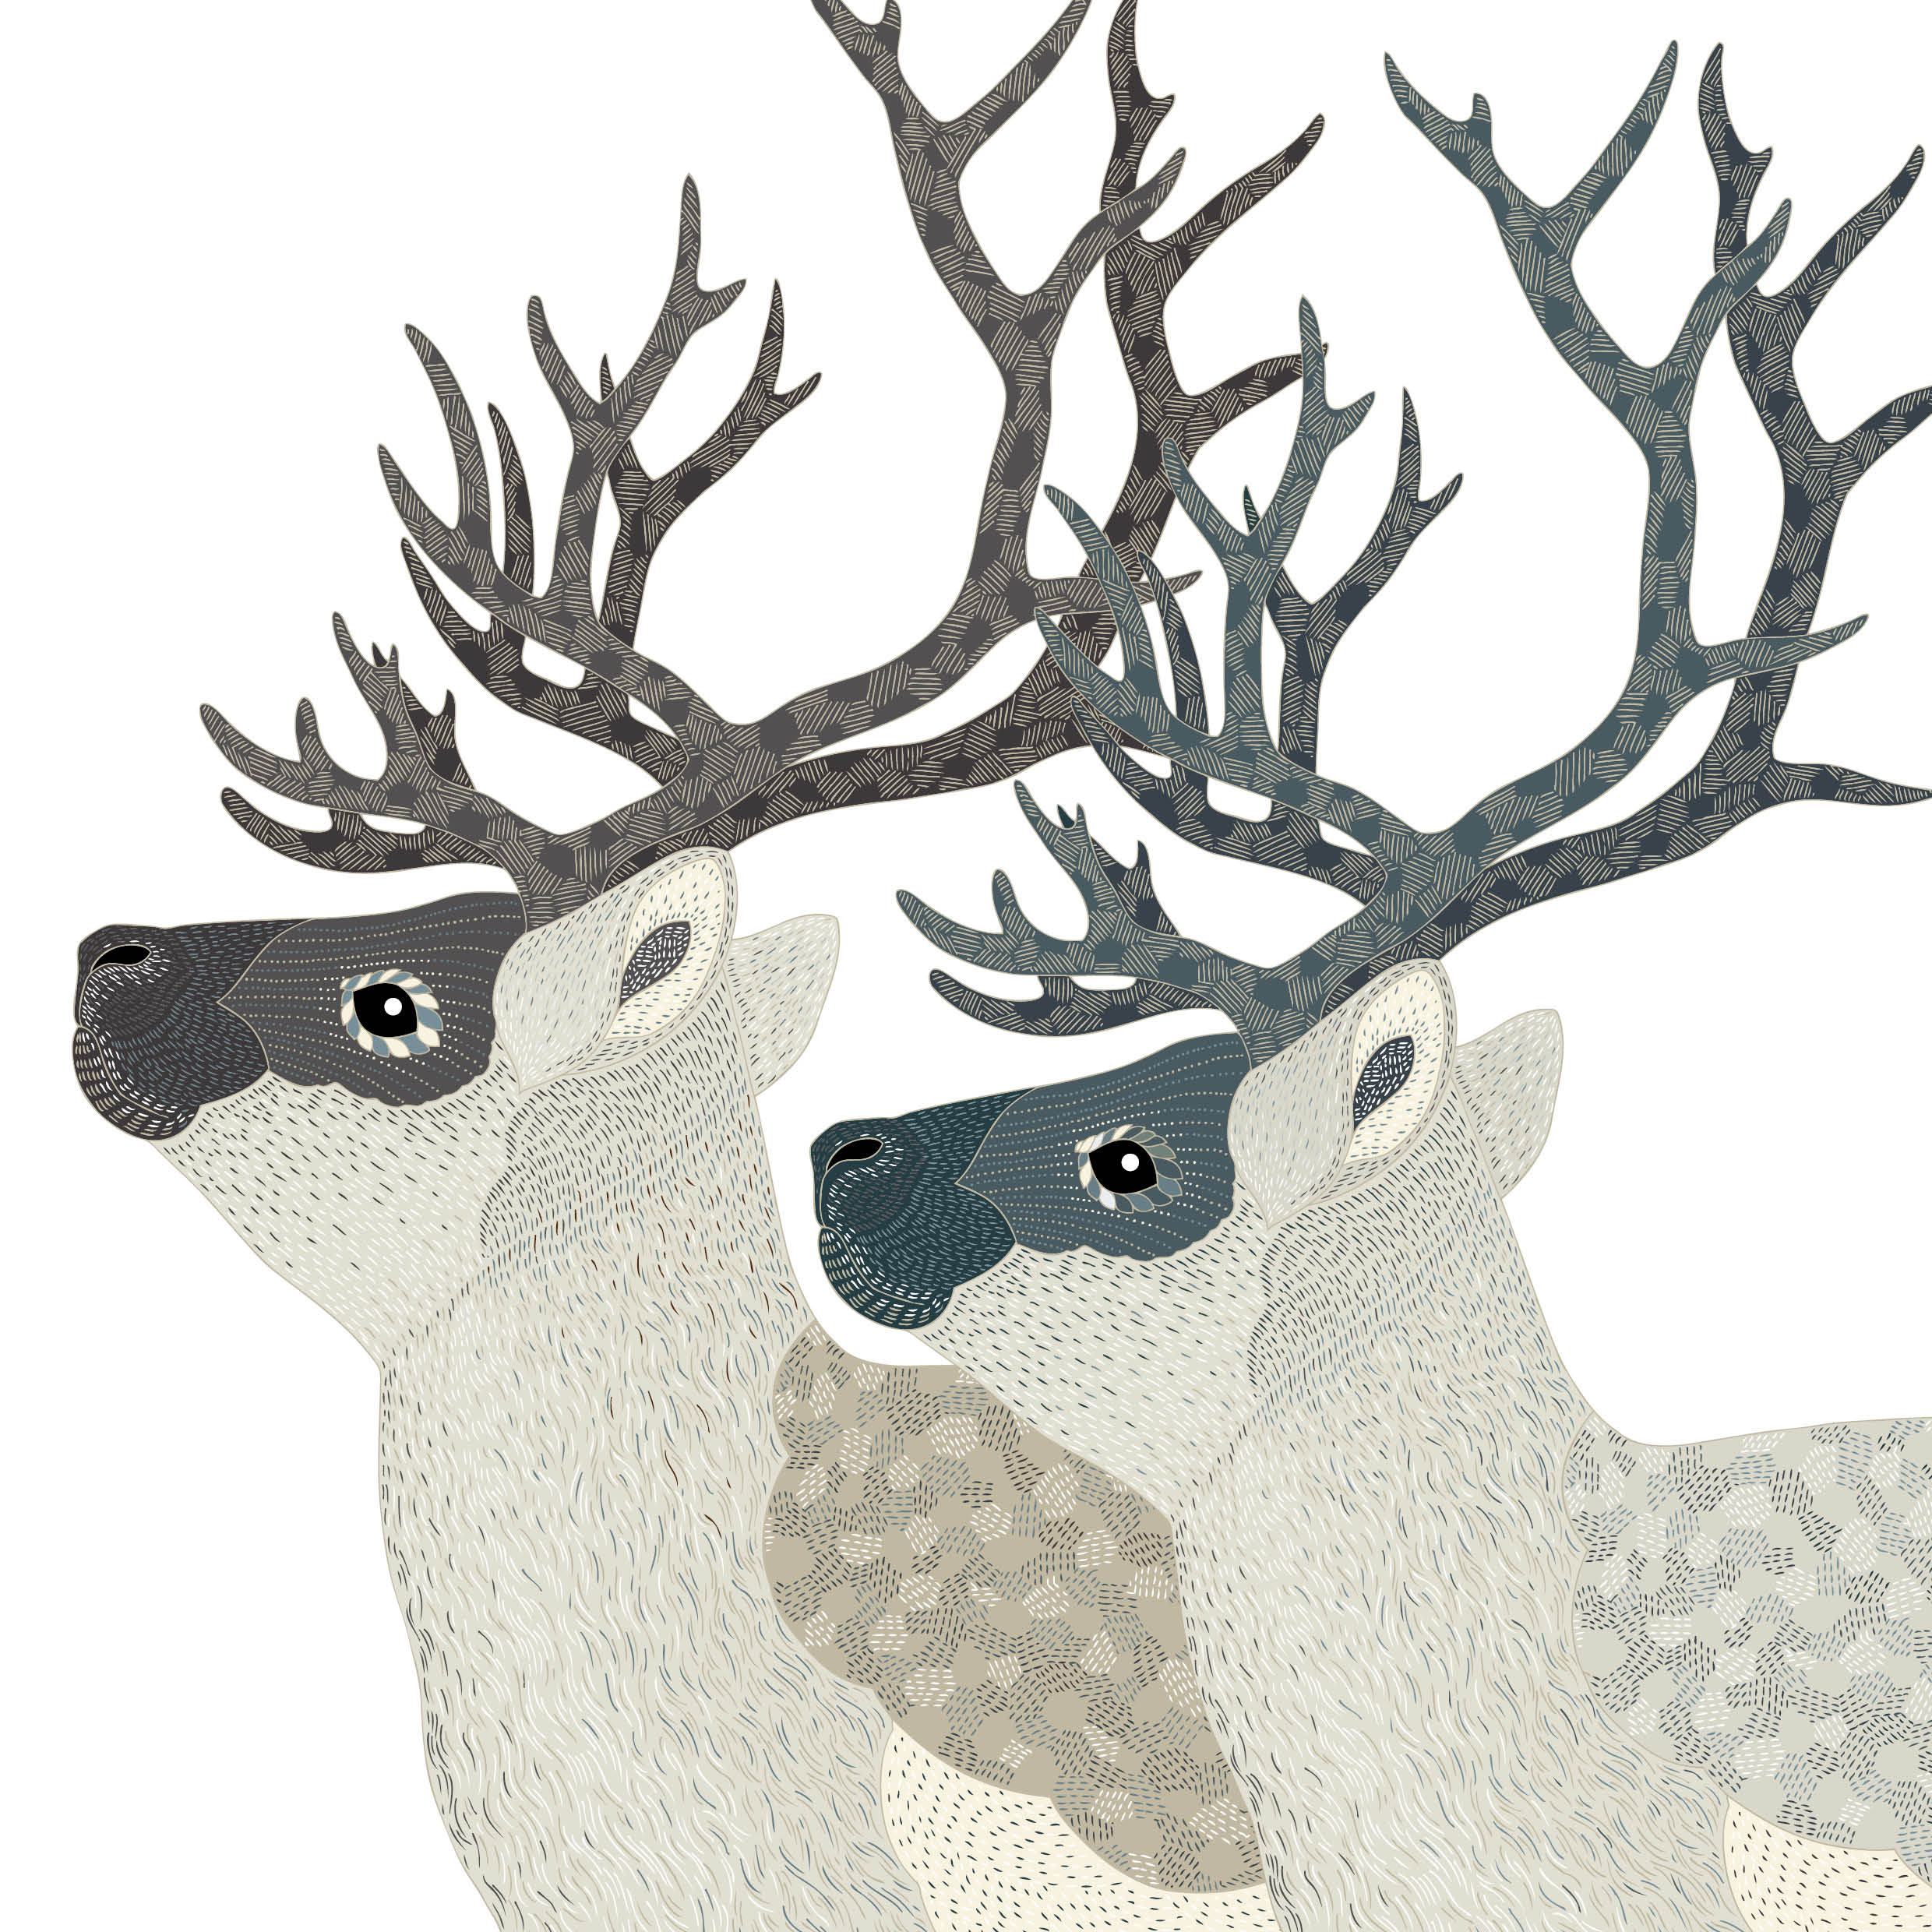 An illustration by Millie Marotta of a caribou